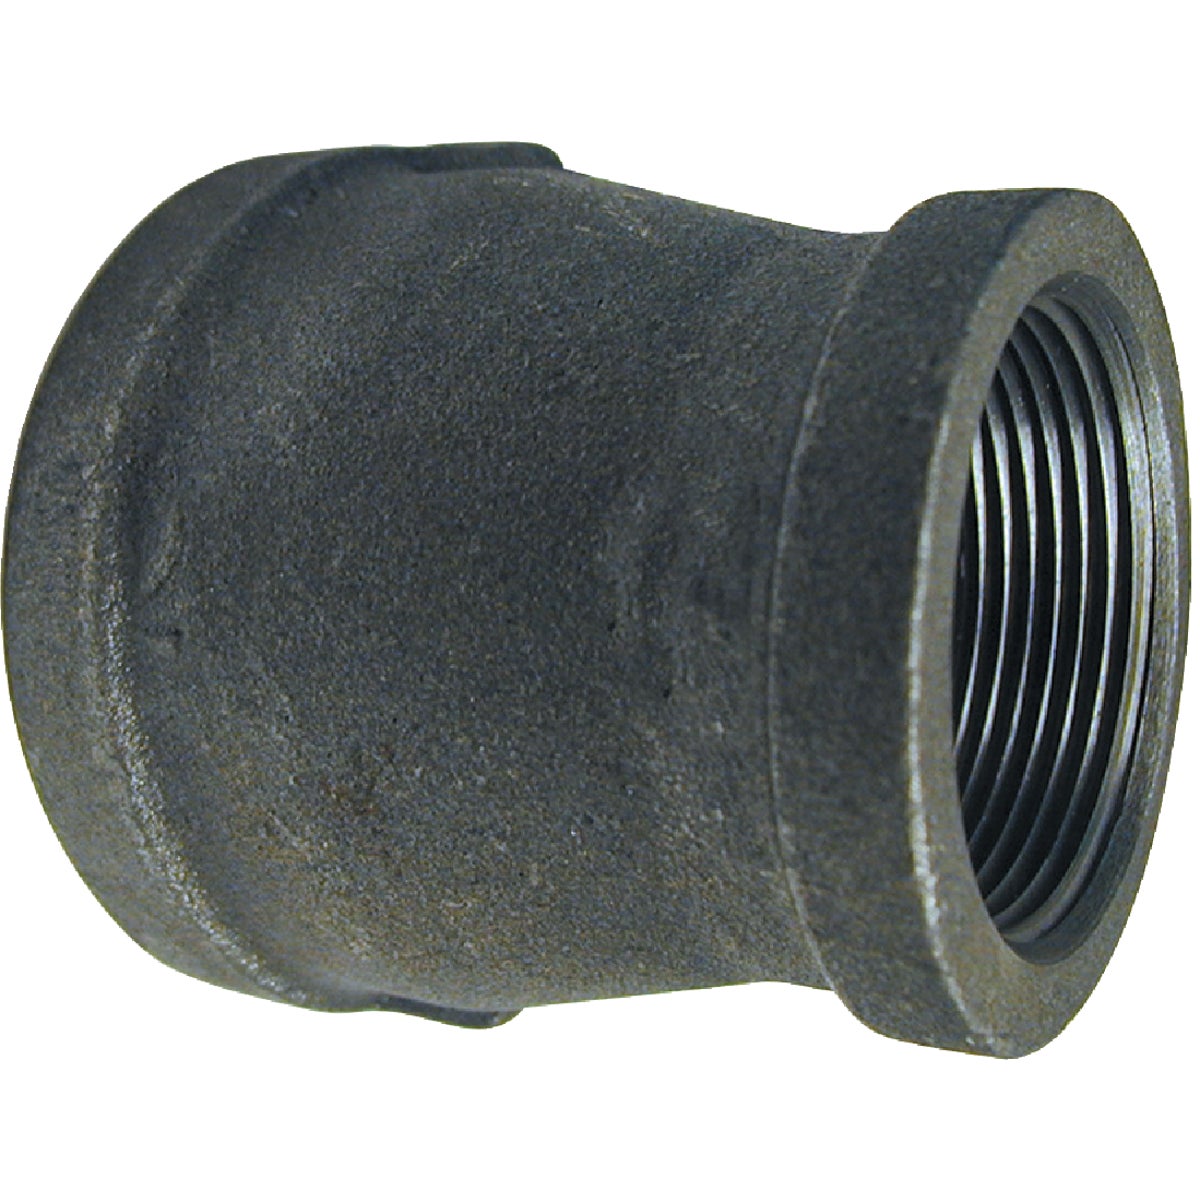 Southland 3/8 In. x 1/4 In. Malleable Black Iron Reducing Coupling